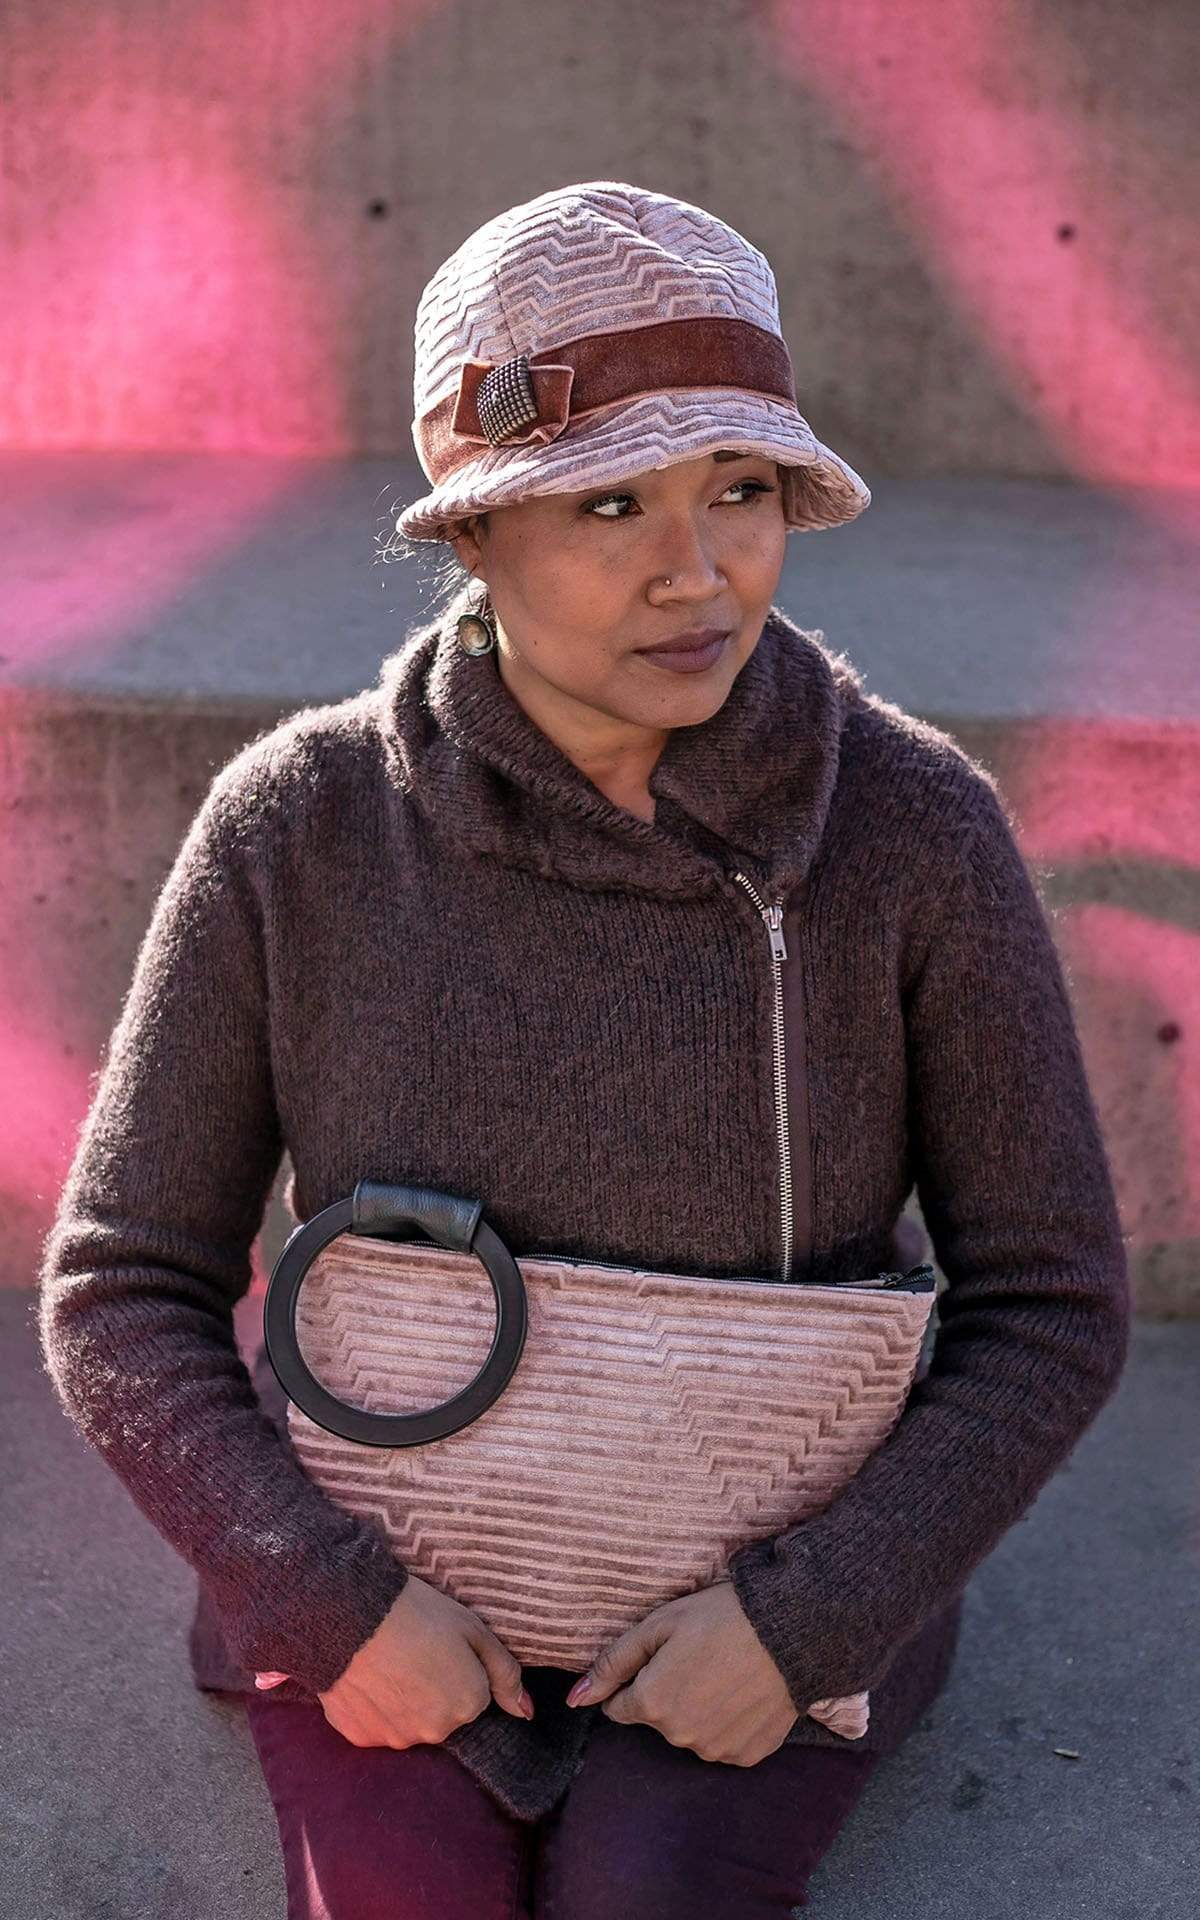 Model wearing a Grace Style 1920s Cloche in Chenille in Cherry Blossom with Rouge Pink Velvet Band and Bow with a Copper Square Button Trim | Model also holding a Paris Bag in Chenille Cherry Blossom eatured |By Pandemonium Millinery | Seattle WA USA